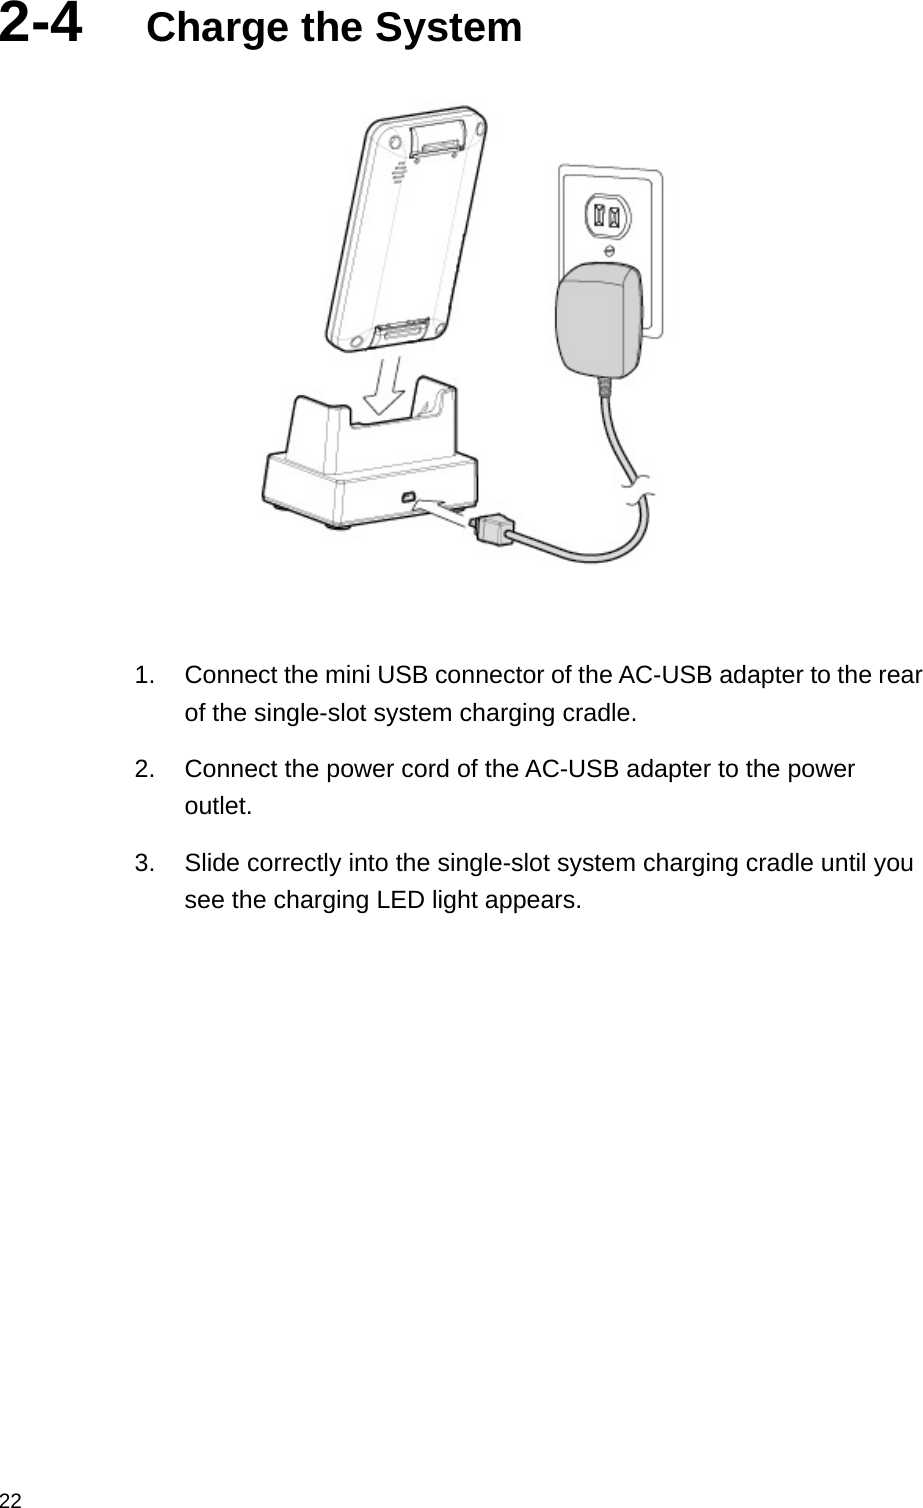  222-4  Charge the System             1.  Connect the mini USB connector of the AC-USB adapter to the rear of the single-slot system charging cradle. 2.  Connect the power cord of the AC-USB adapter to the power outlet. 3.  Slide correctly into the single-slot system charging cradle until you see the charging LED light appears.  